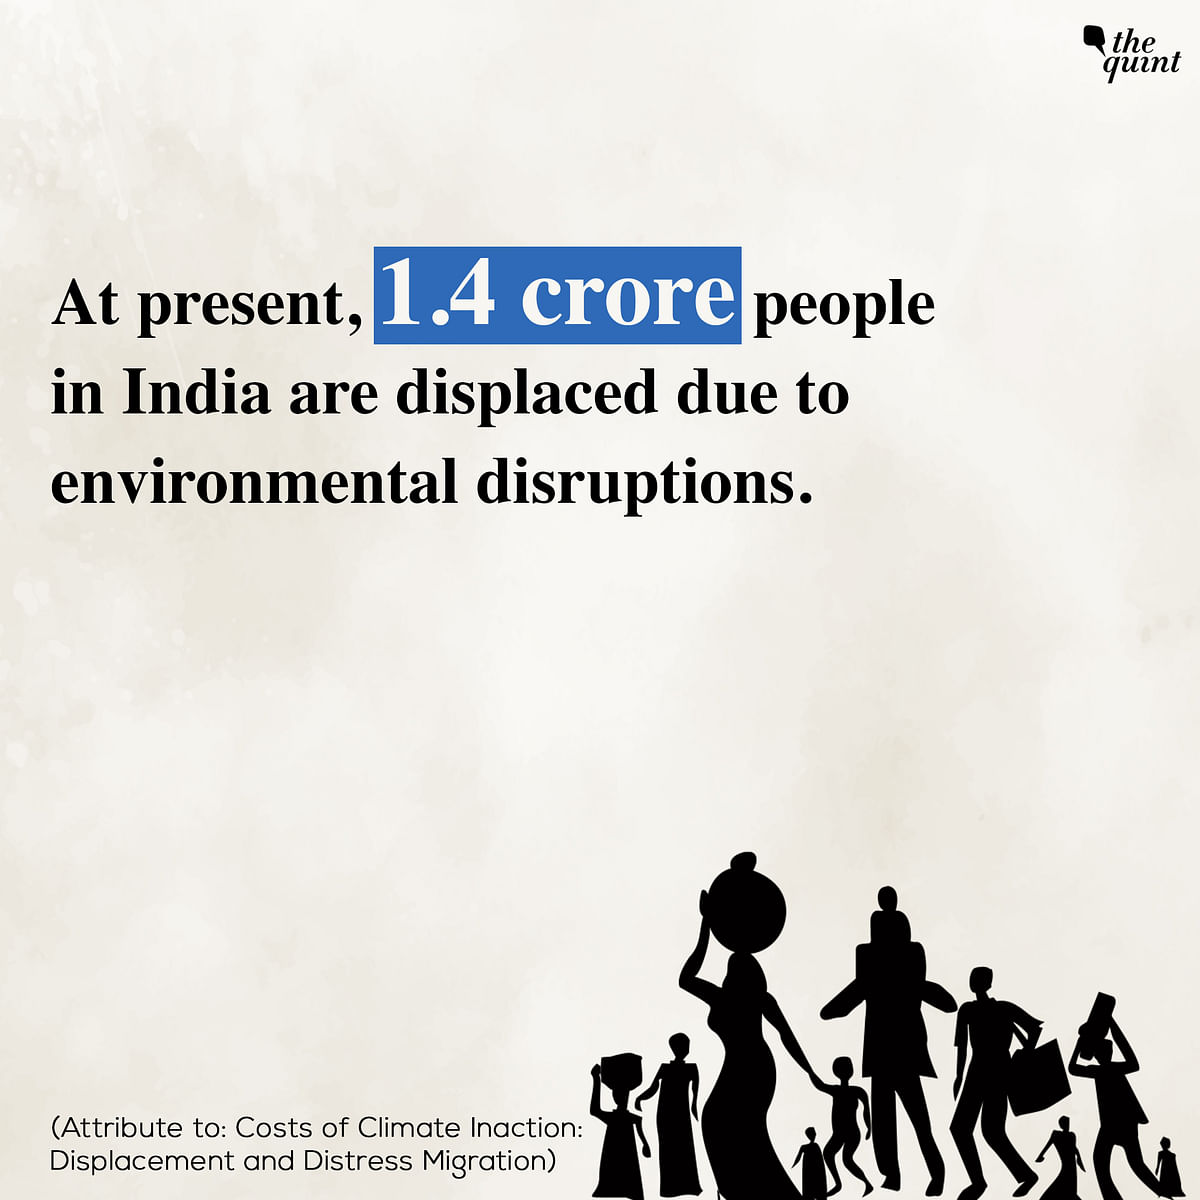 At present, 1.4 crore people in India are displaced due to environmental disruptions, the report said.